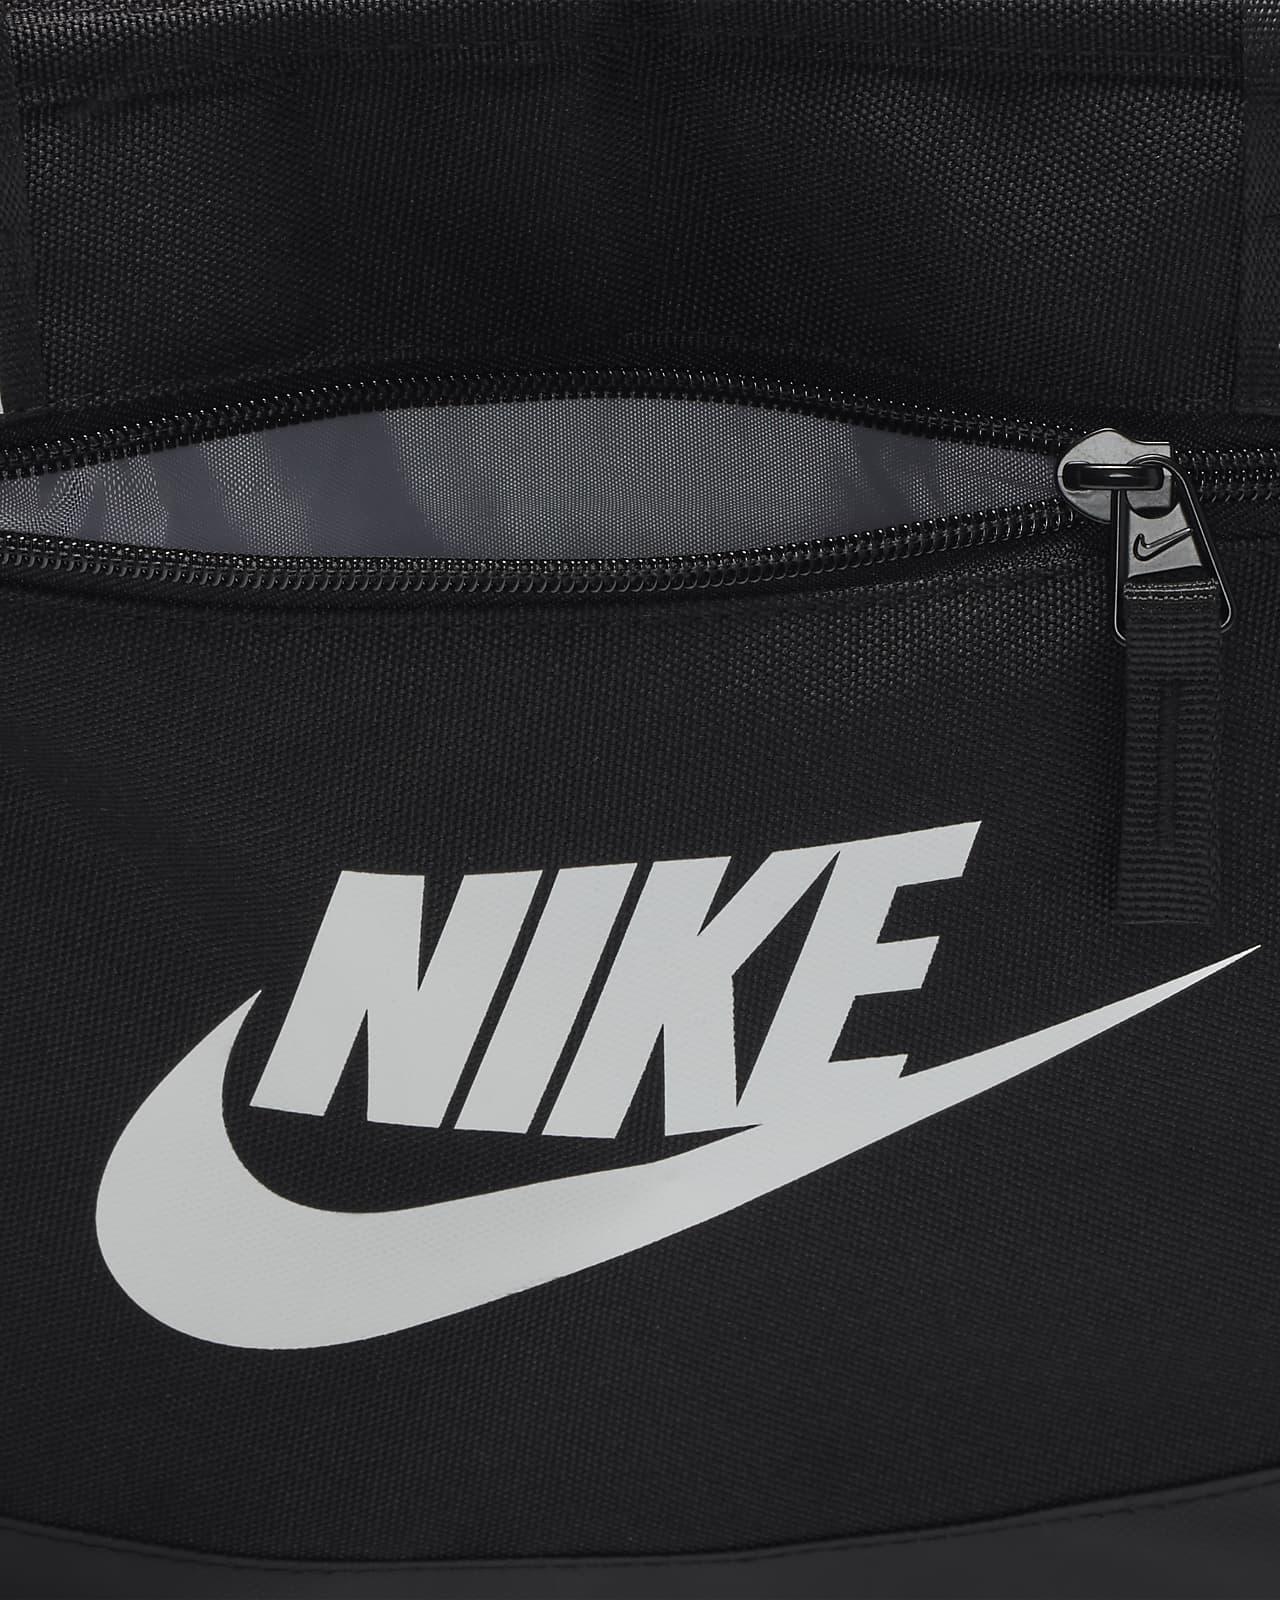 Nike Kid's Futura-Hard-Liner Lunch Tote Bag Texture Insulated